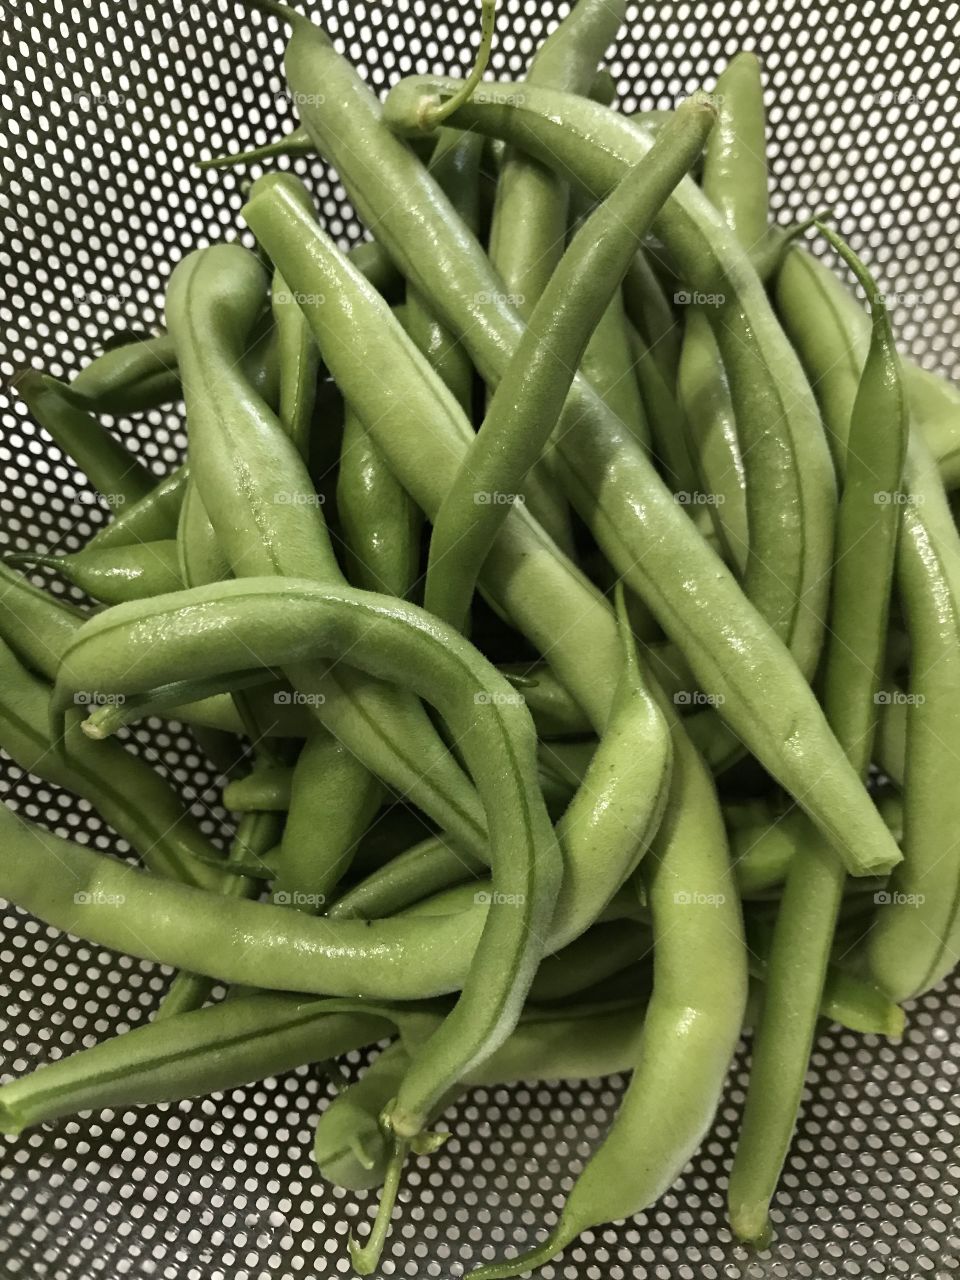 Fresh picked green beans from our garden